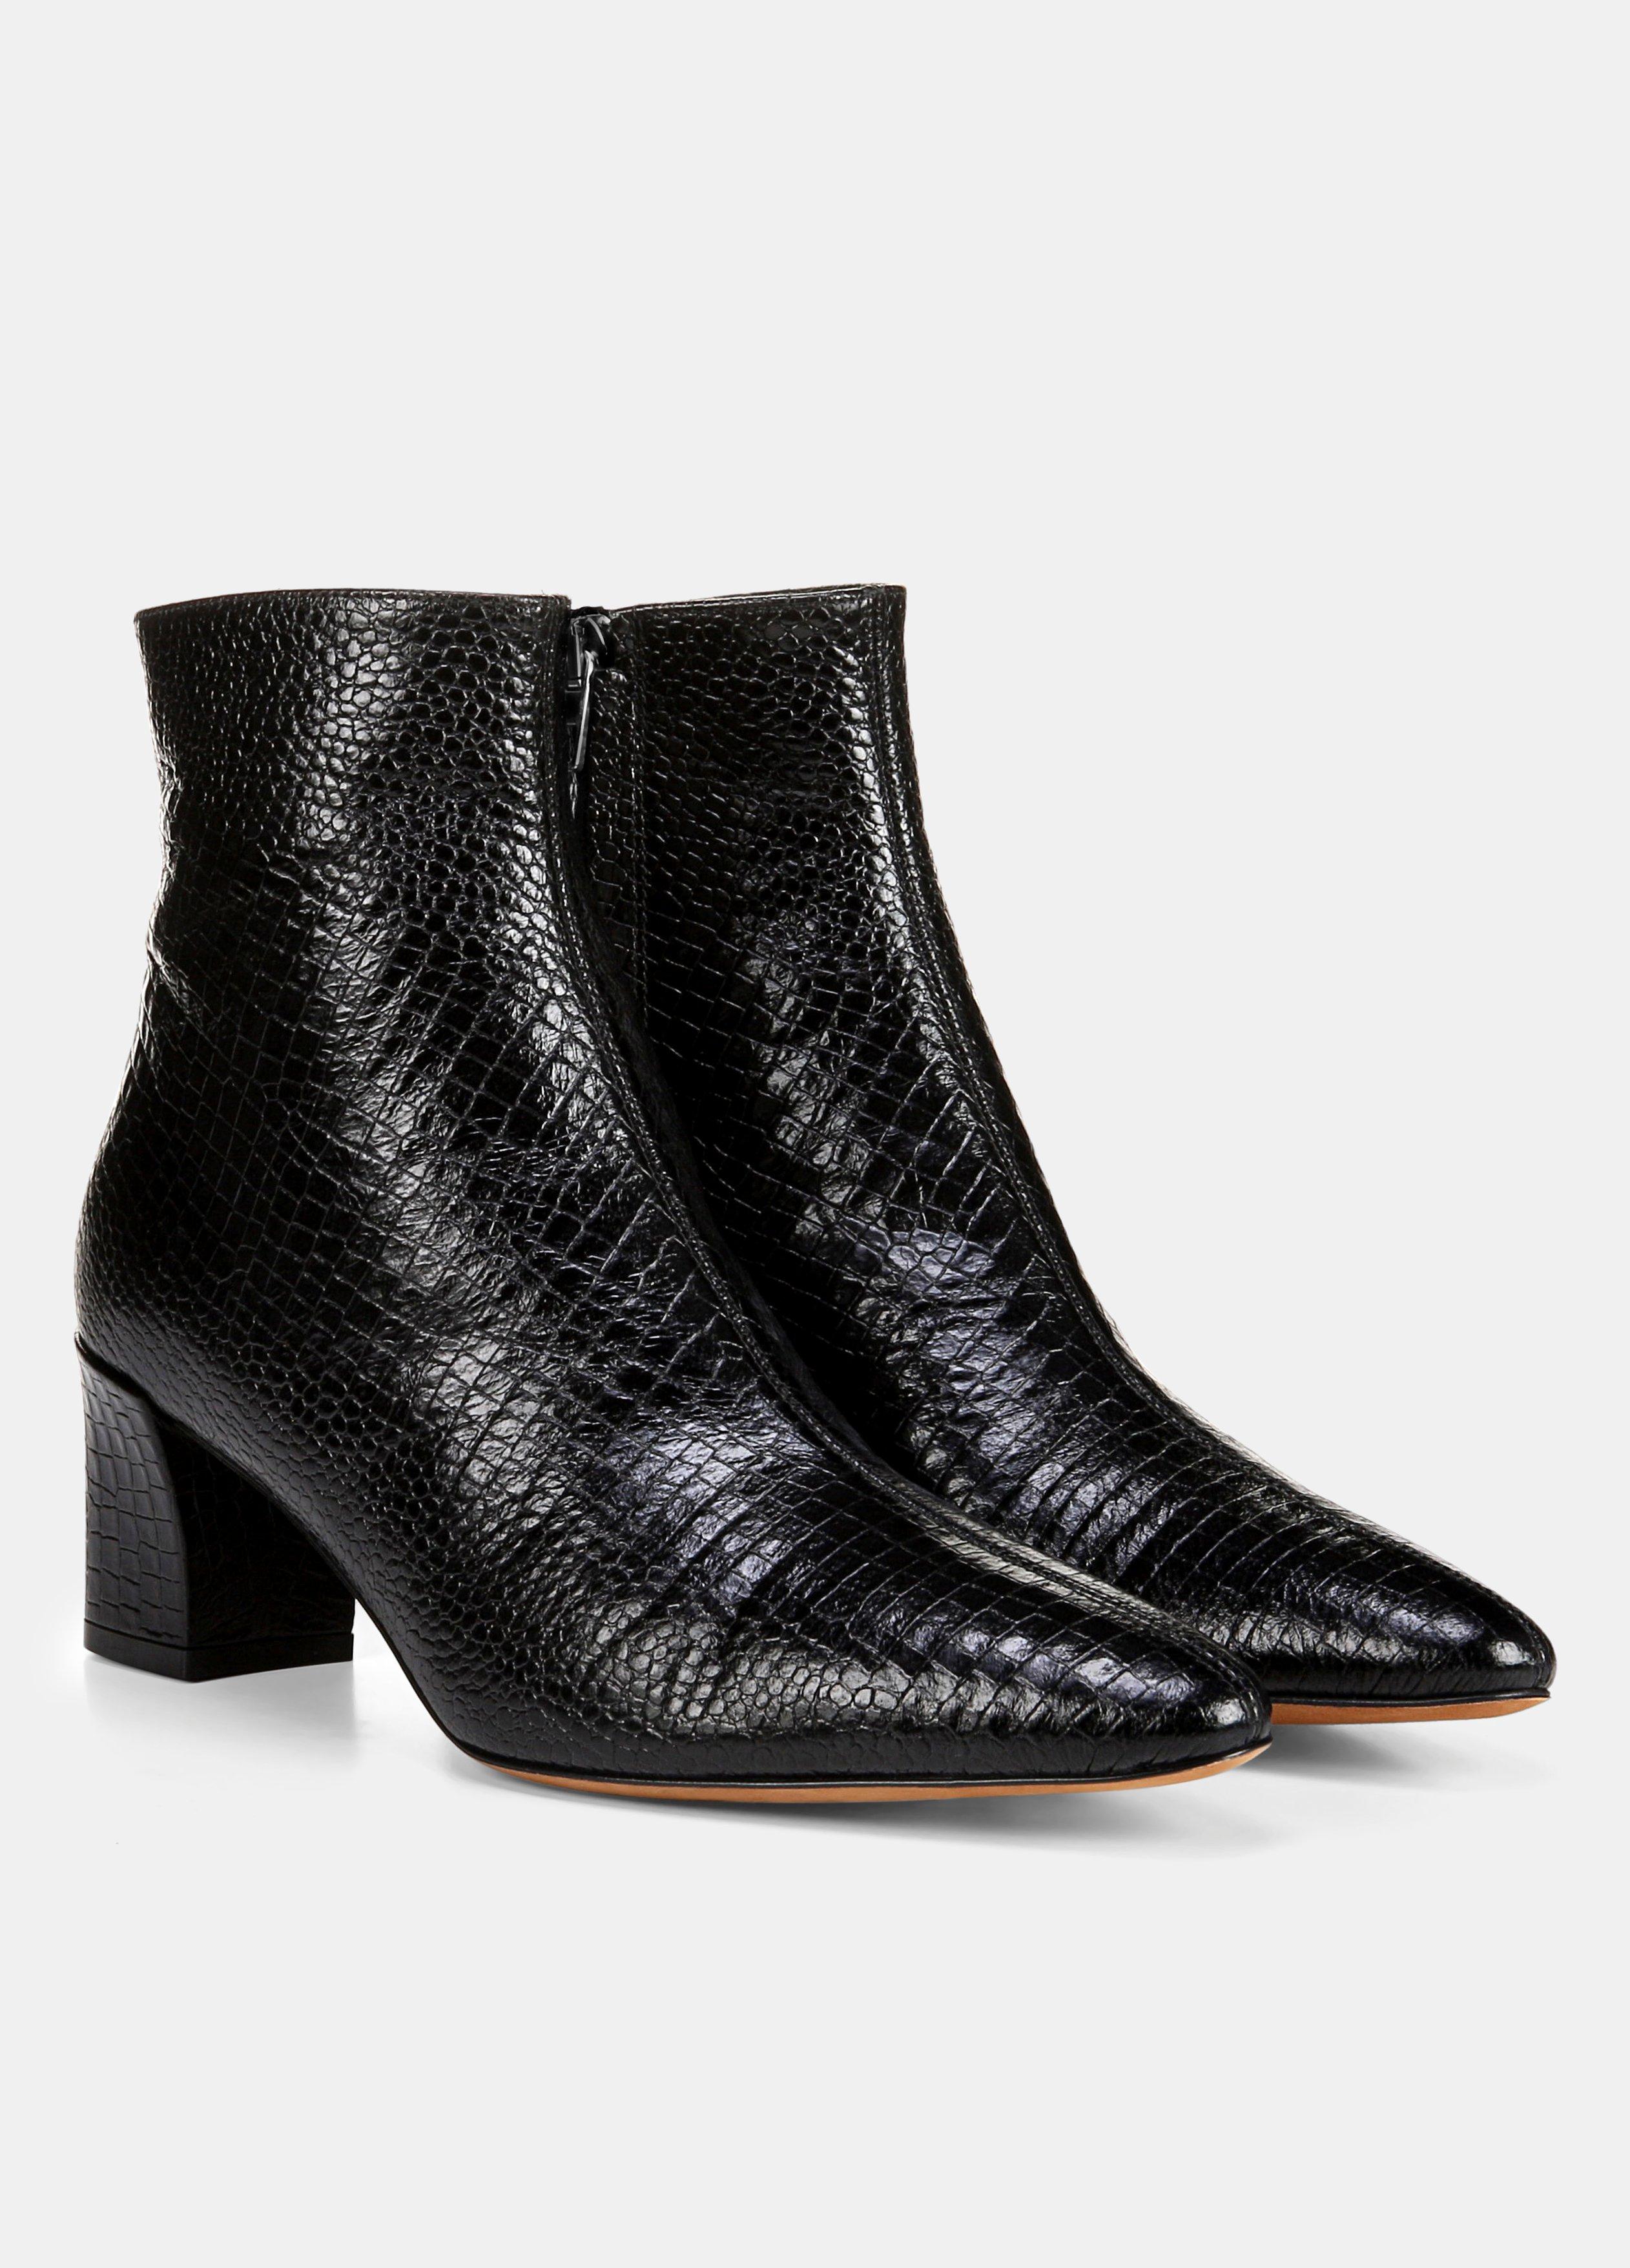 Croc Lanica Boot for Women | Vince